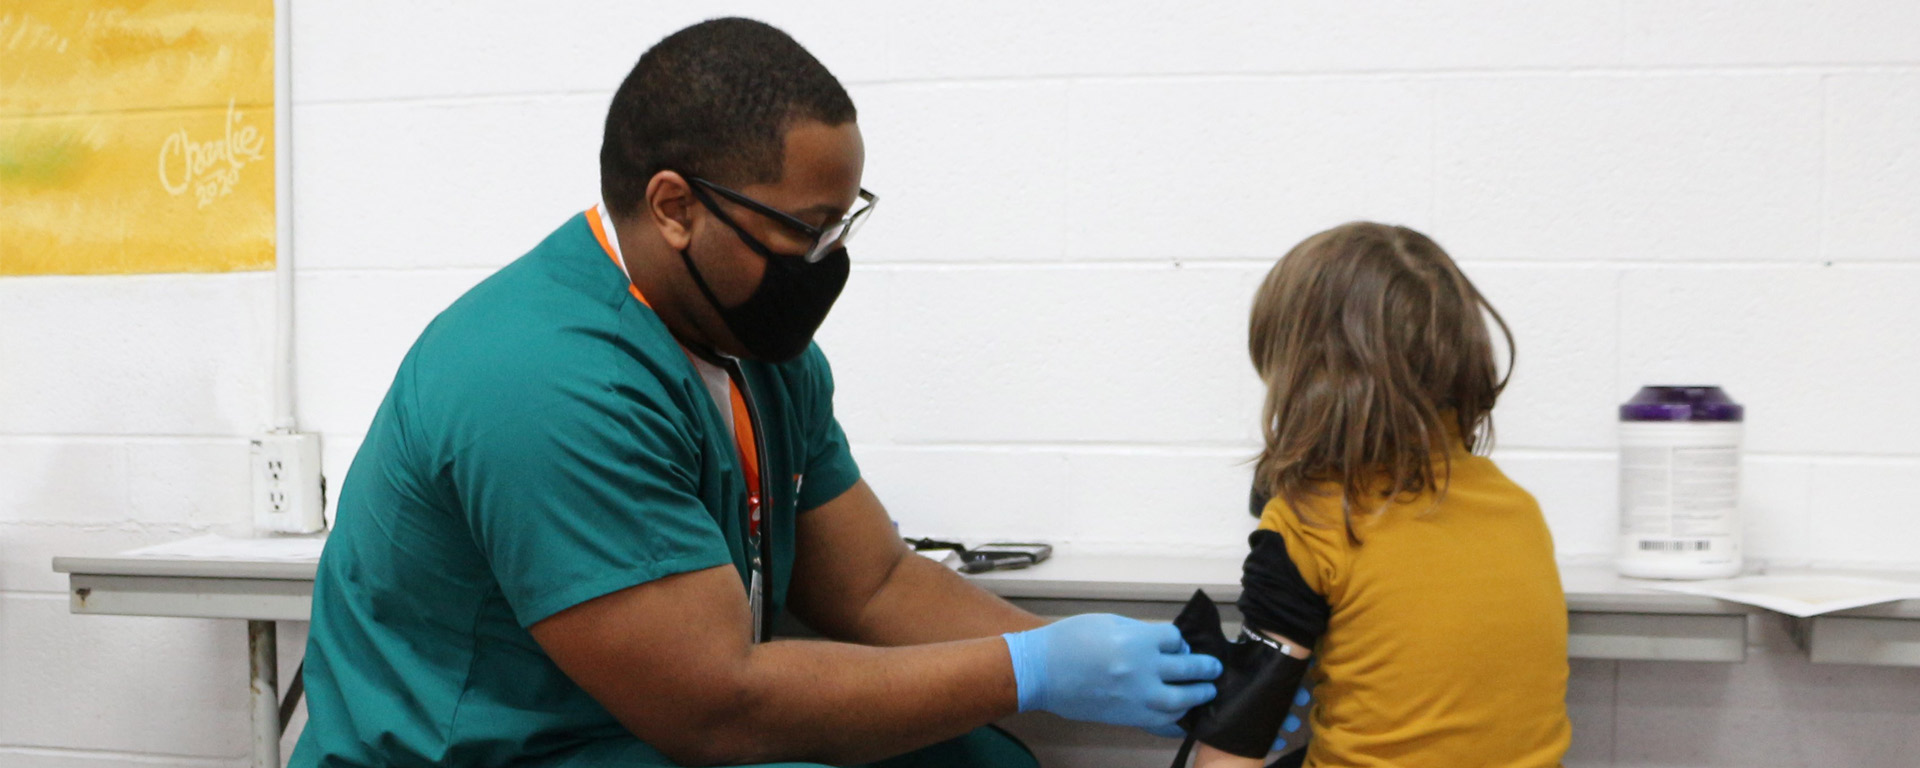 UTHSC nursing students will be providing outreach to underserved communities with a mobile health unit.